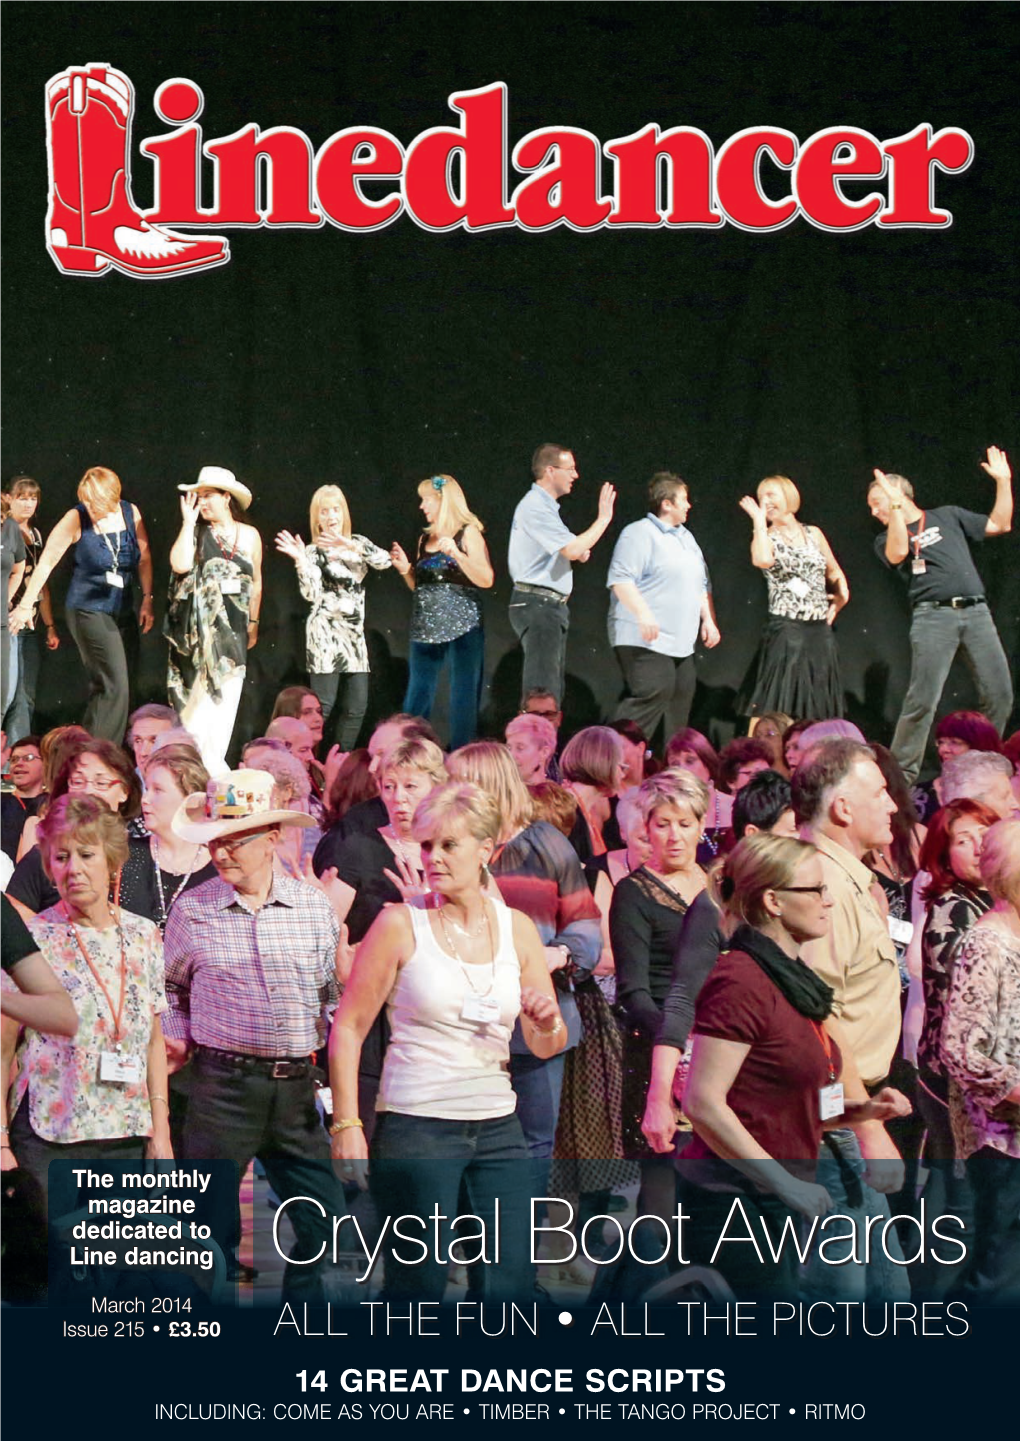 Crystal Boot Awards March 2014 Issue 215 • £3.50 ALL the FUN • ALL the PICTURES 14 GREAT DANCE SCRIPTS INCLUDING: COME AS YOU ARE • TIMBER • the TANGO PROJECT • RITMO